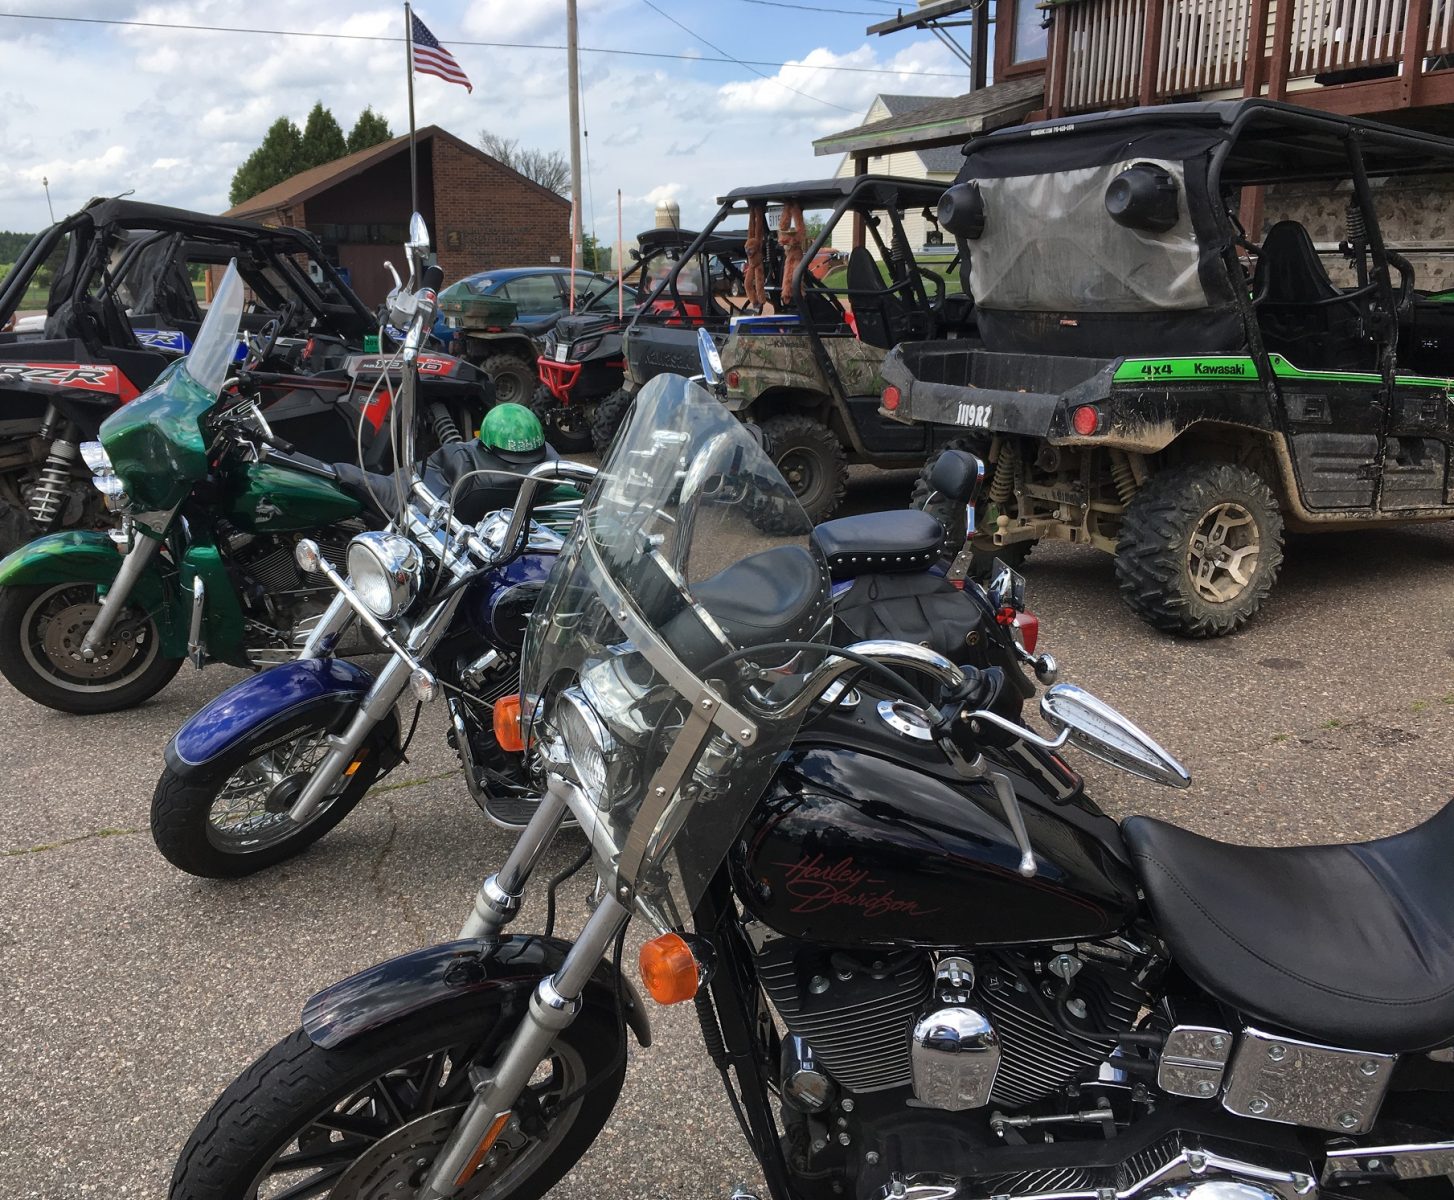 Local bikers, ATV’ers unite to support Merrill ‘Food For Kids’